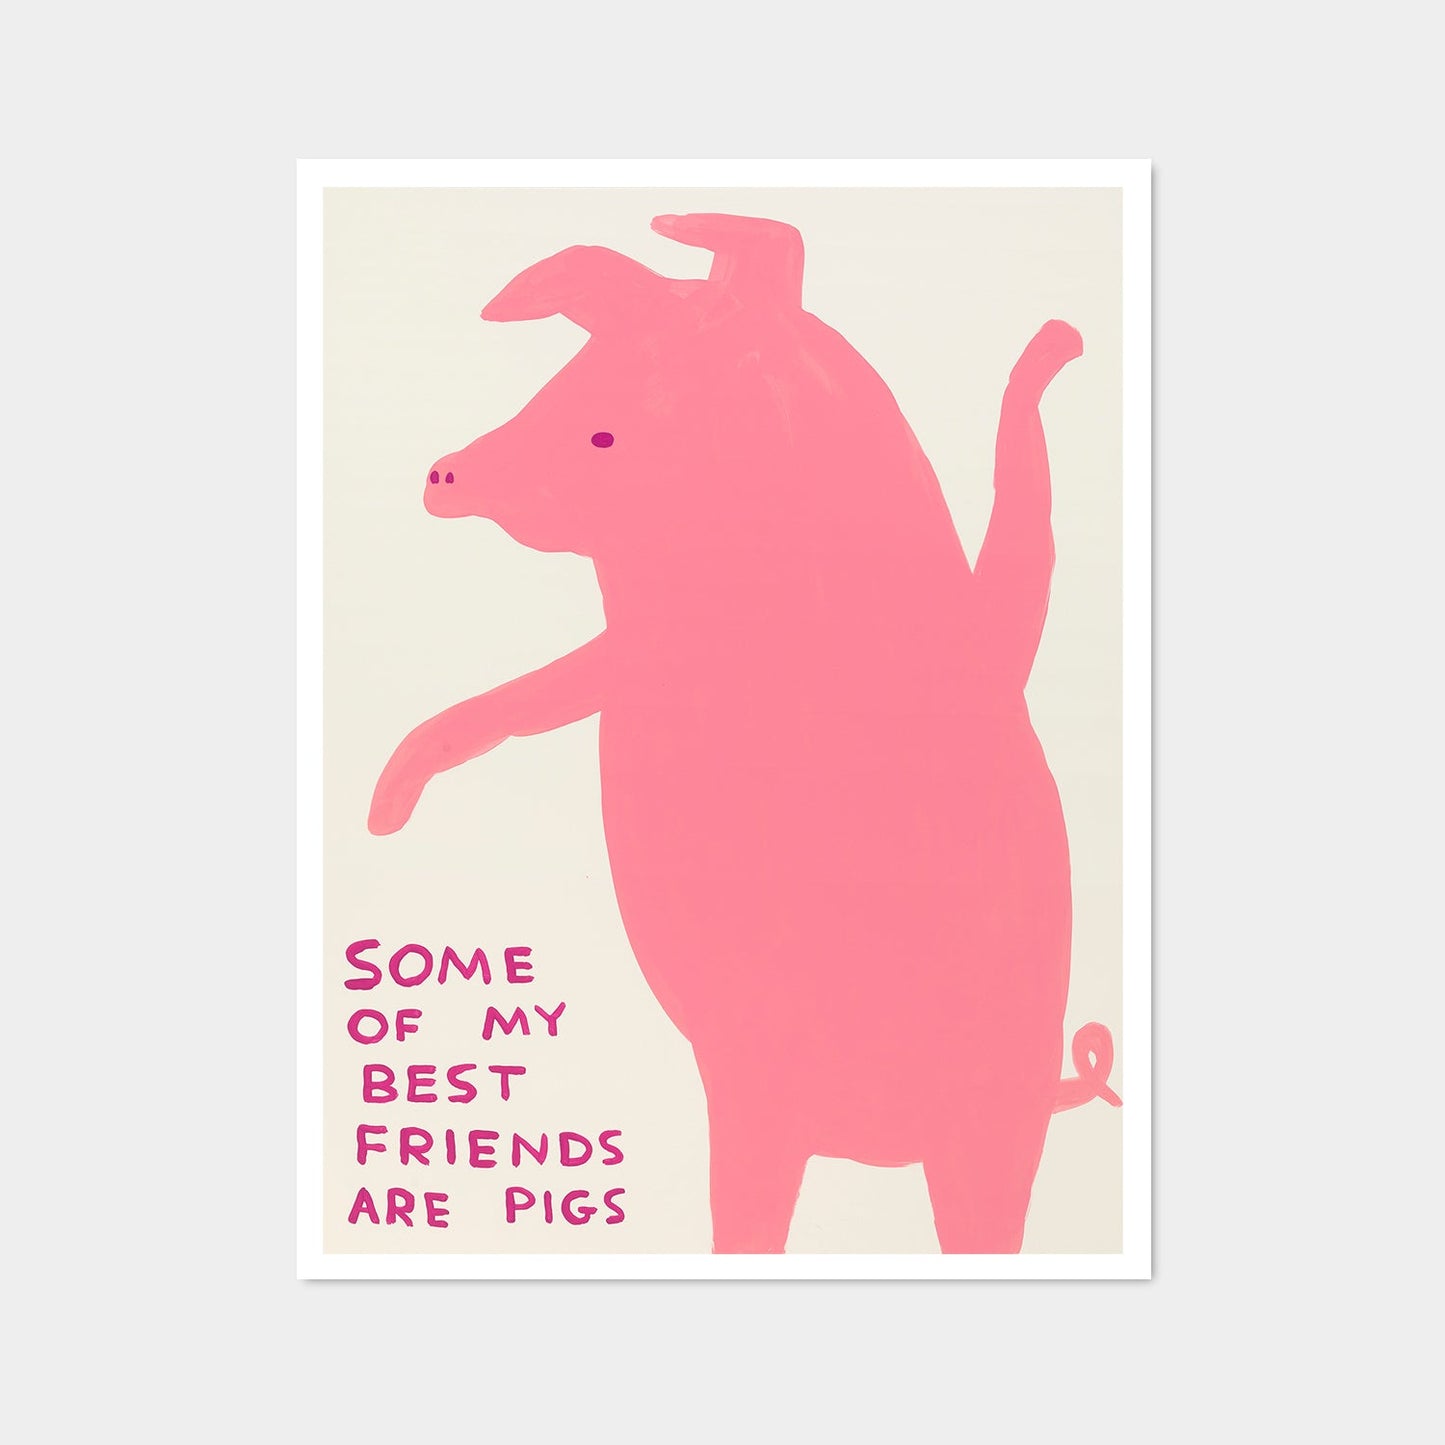 David Shrigley print featuring a pig standing up over handwritten text stating 'some of my best friends are pigs'.